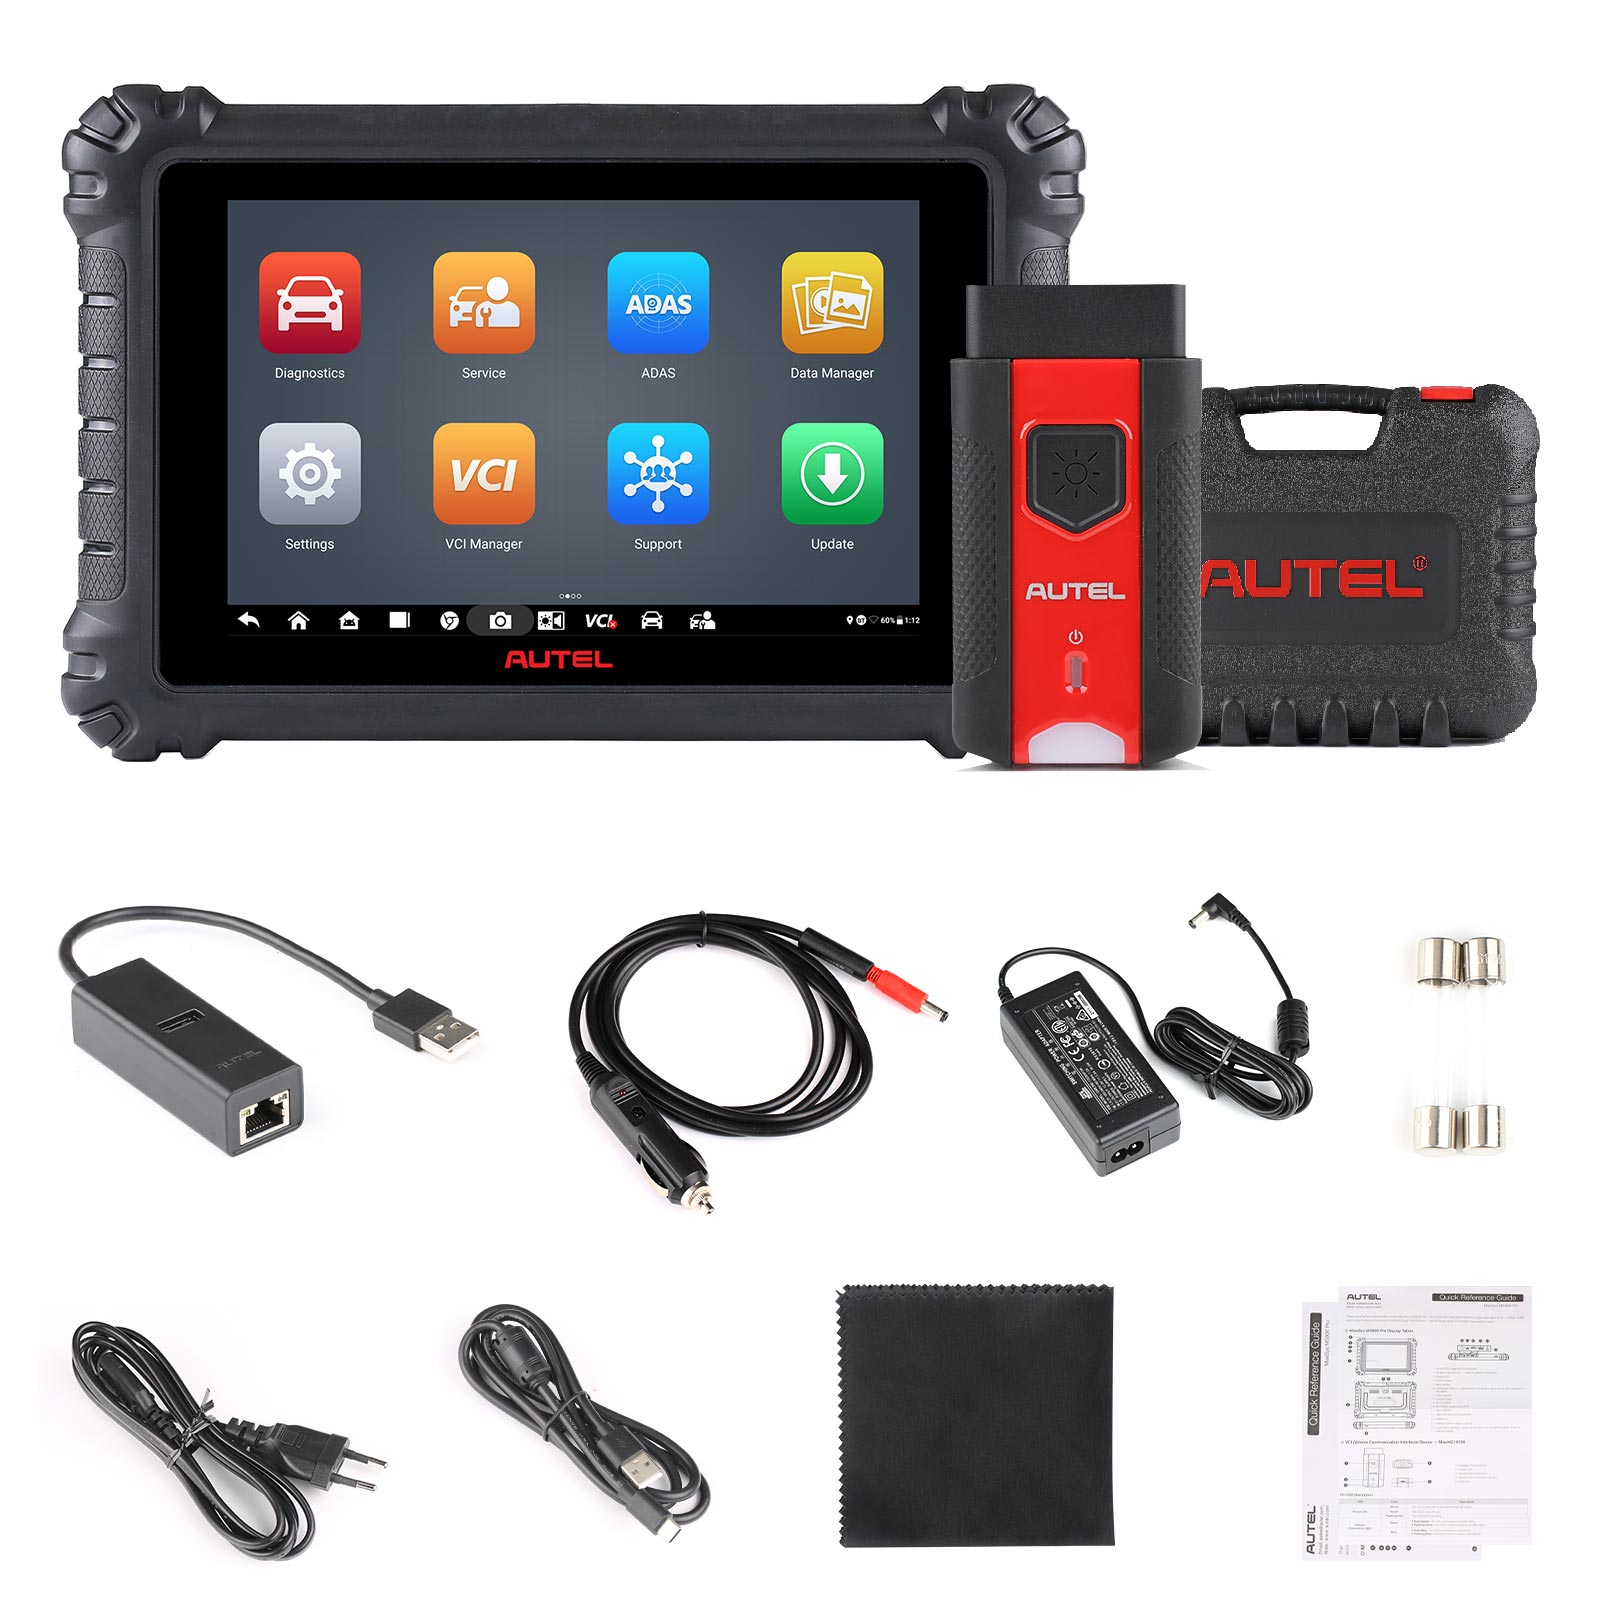 Autel MaxiSYS MS906 Pro-TS OBD2 Wi-Fi Diagnostic Scanner and TPMS